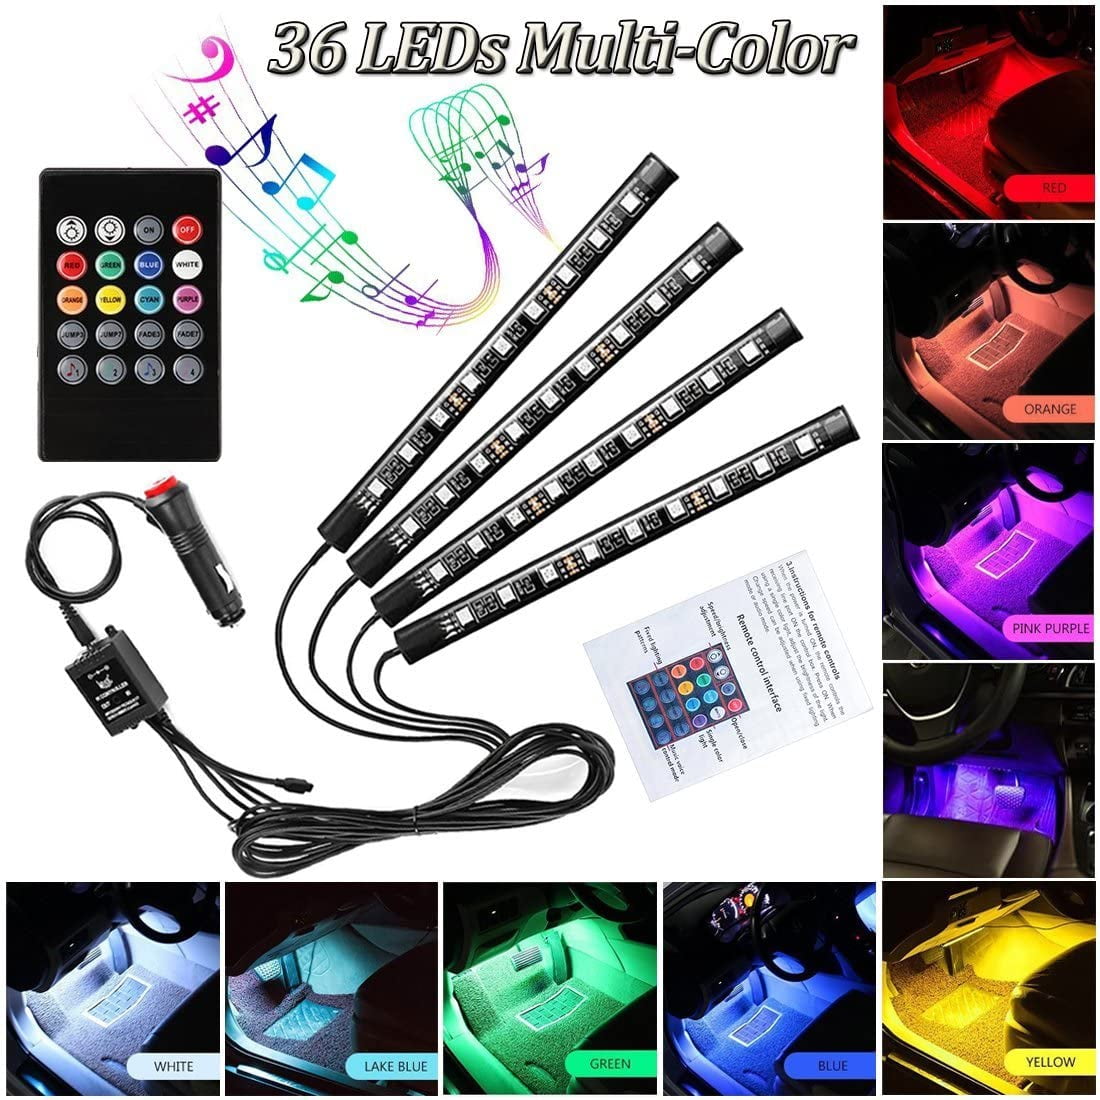 Car Charger 36 LED, 121MM Wireless Remote Control Multicolor Music Car Interior Atmosphere Lights For Car interior lighting with Sound Active Function Car Neon Accent LED Strip Light 